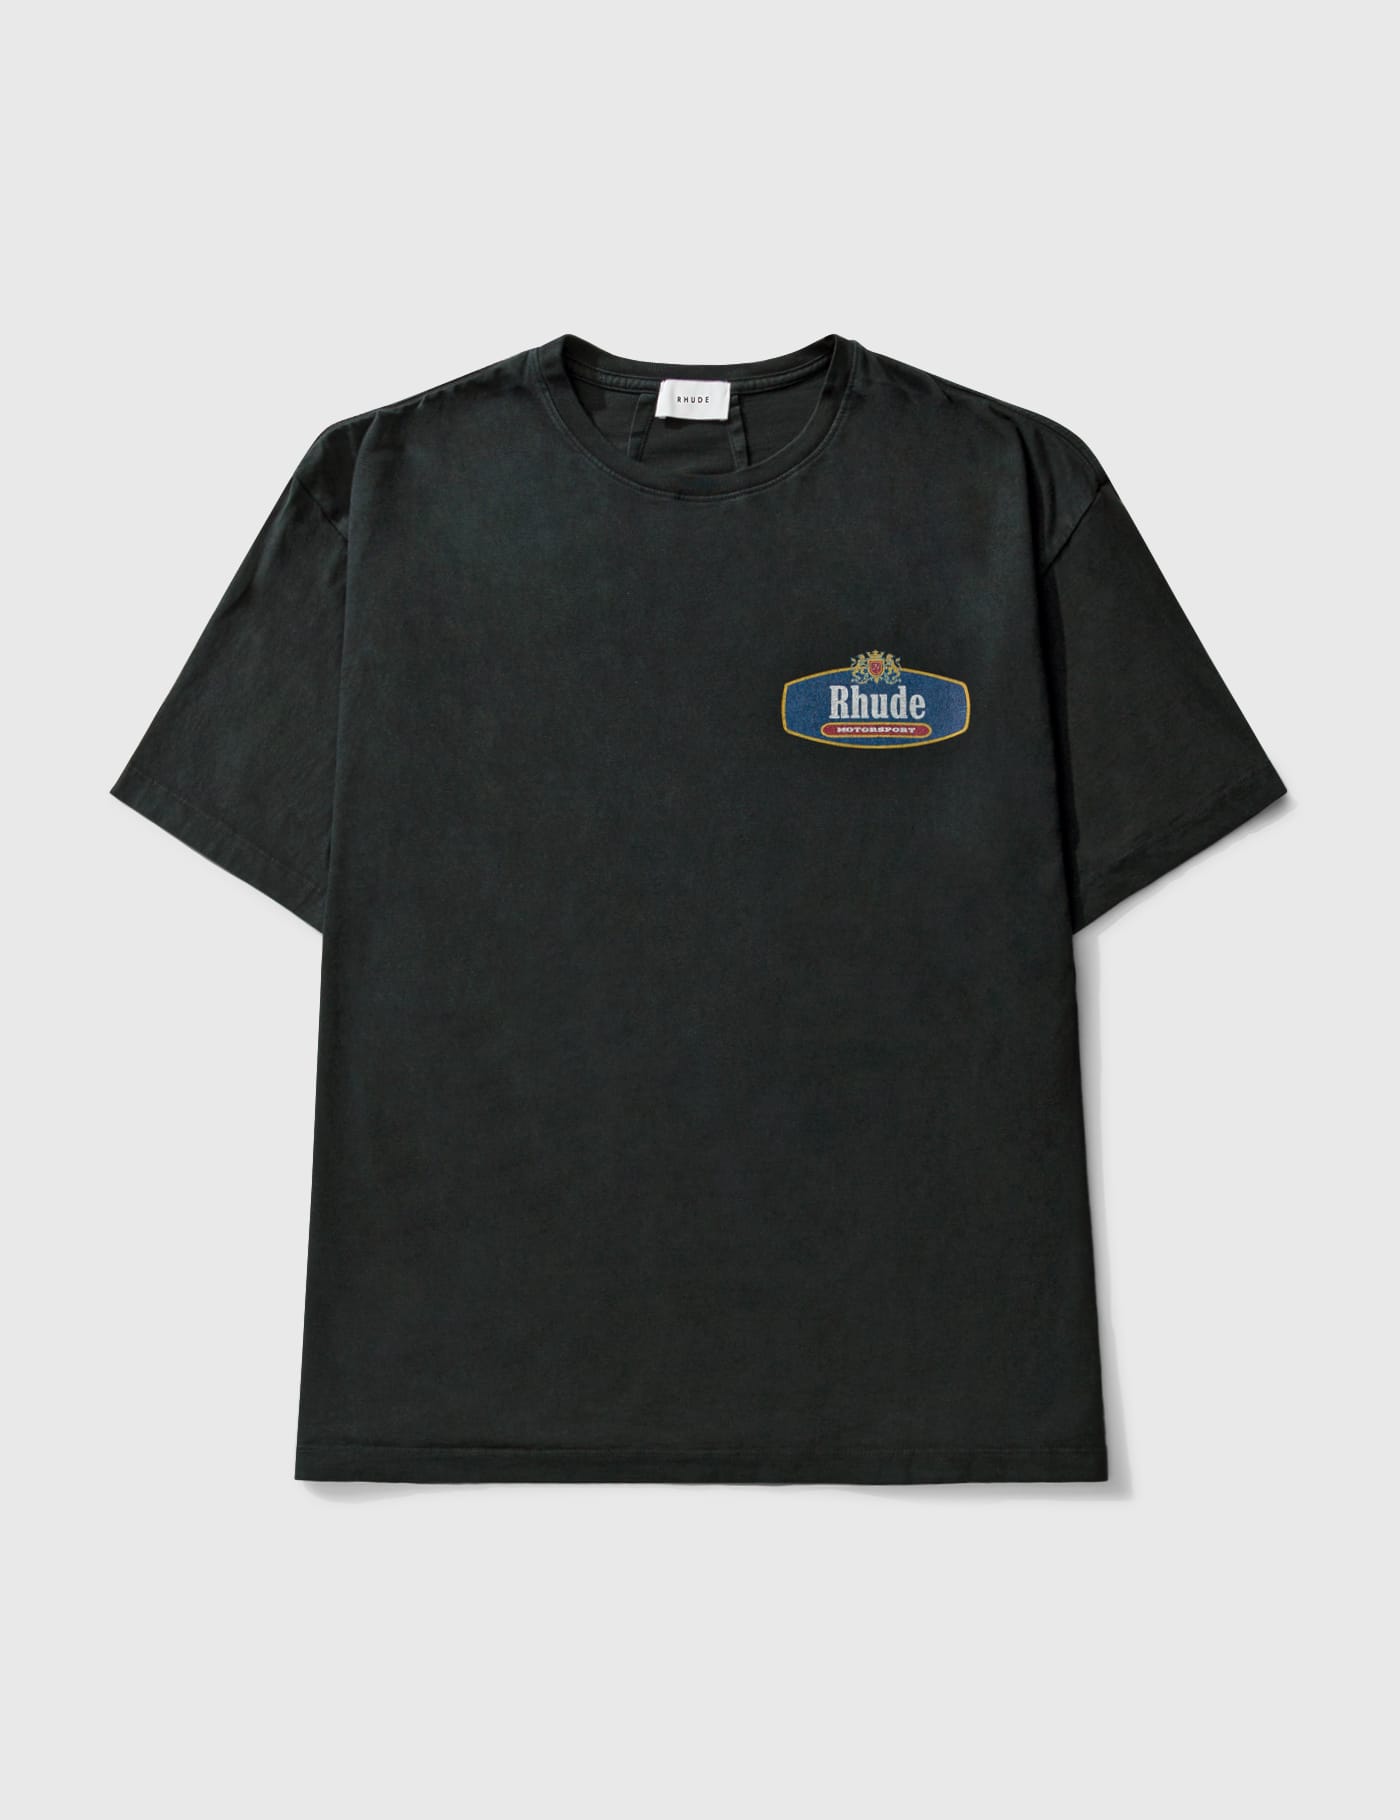 Rhude - Racing Crest T-shirt | HBX - Globally Curated Fashion and 